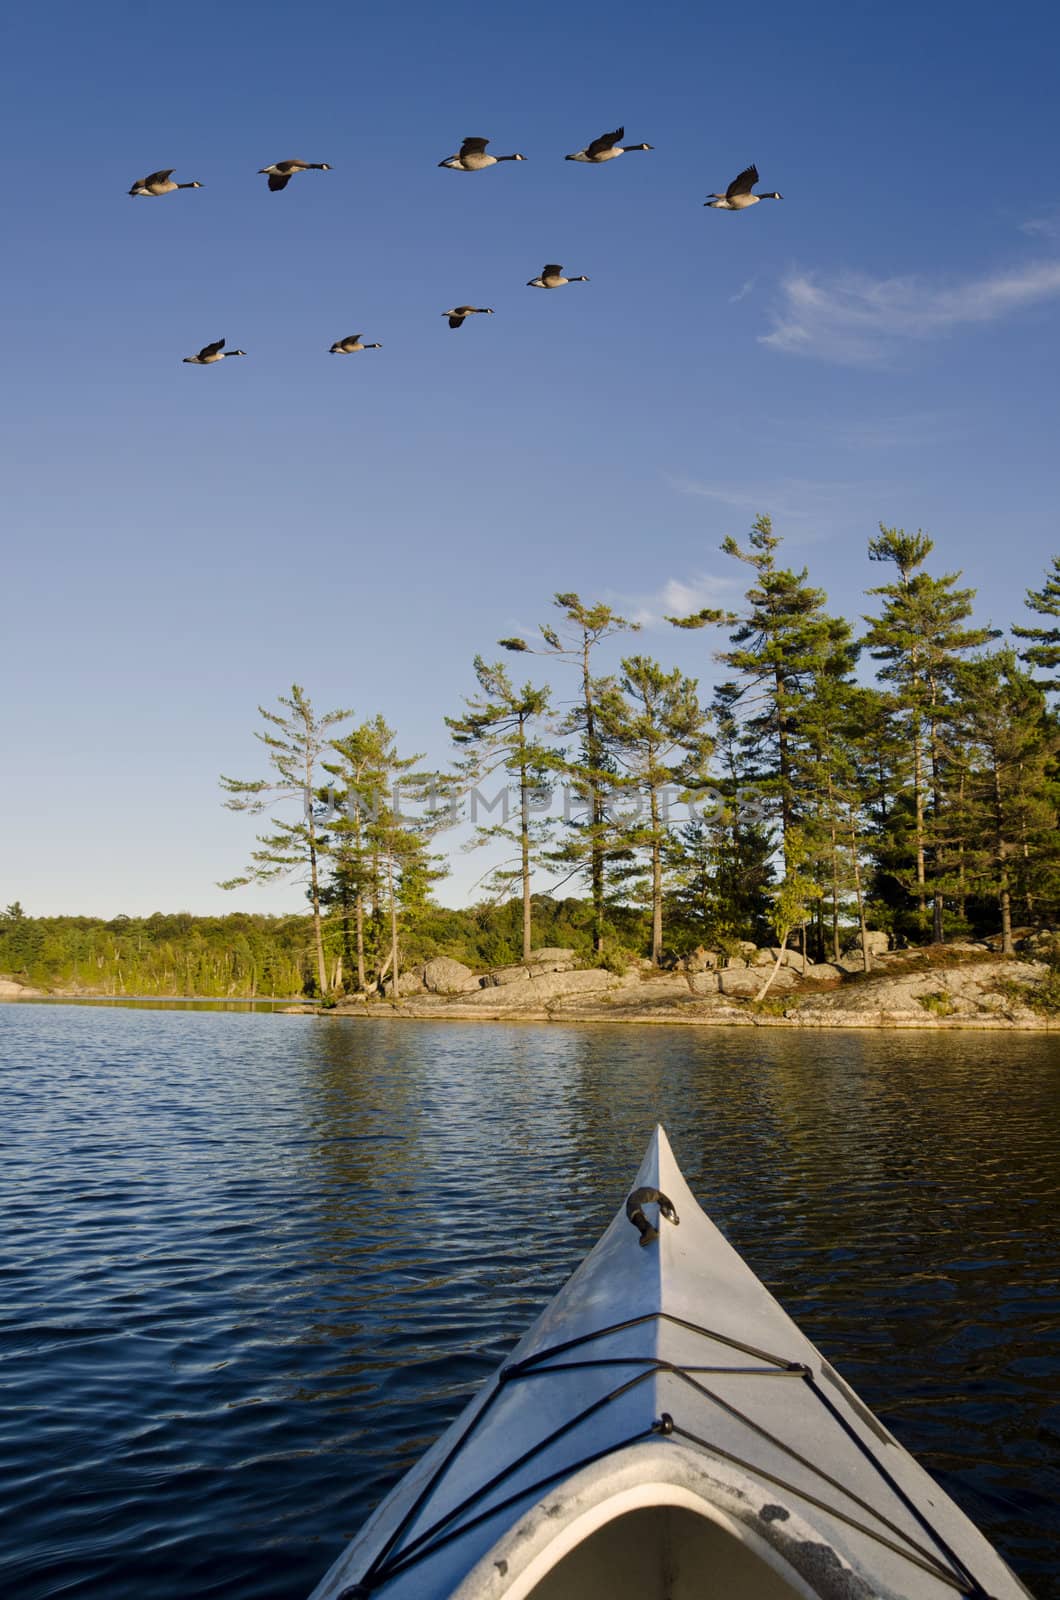 Geese Flys Over Kayak on a Northern Lake by Gordo25